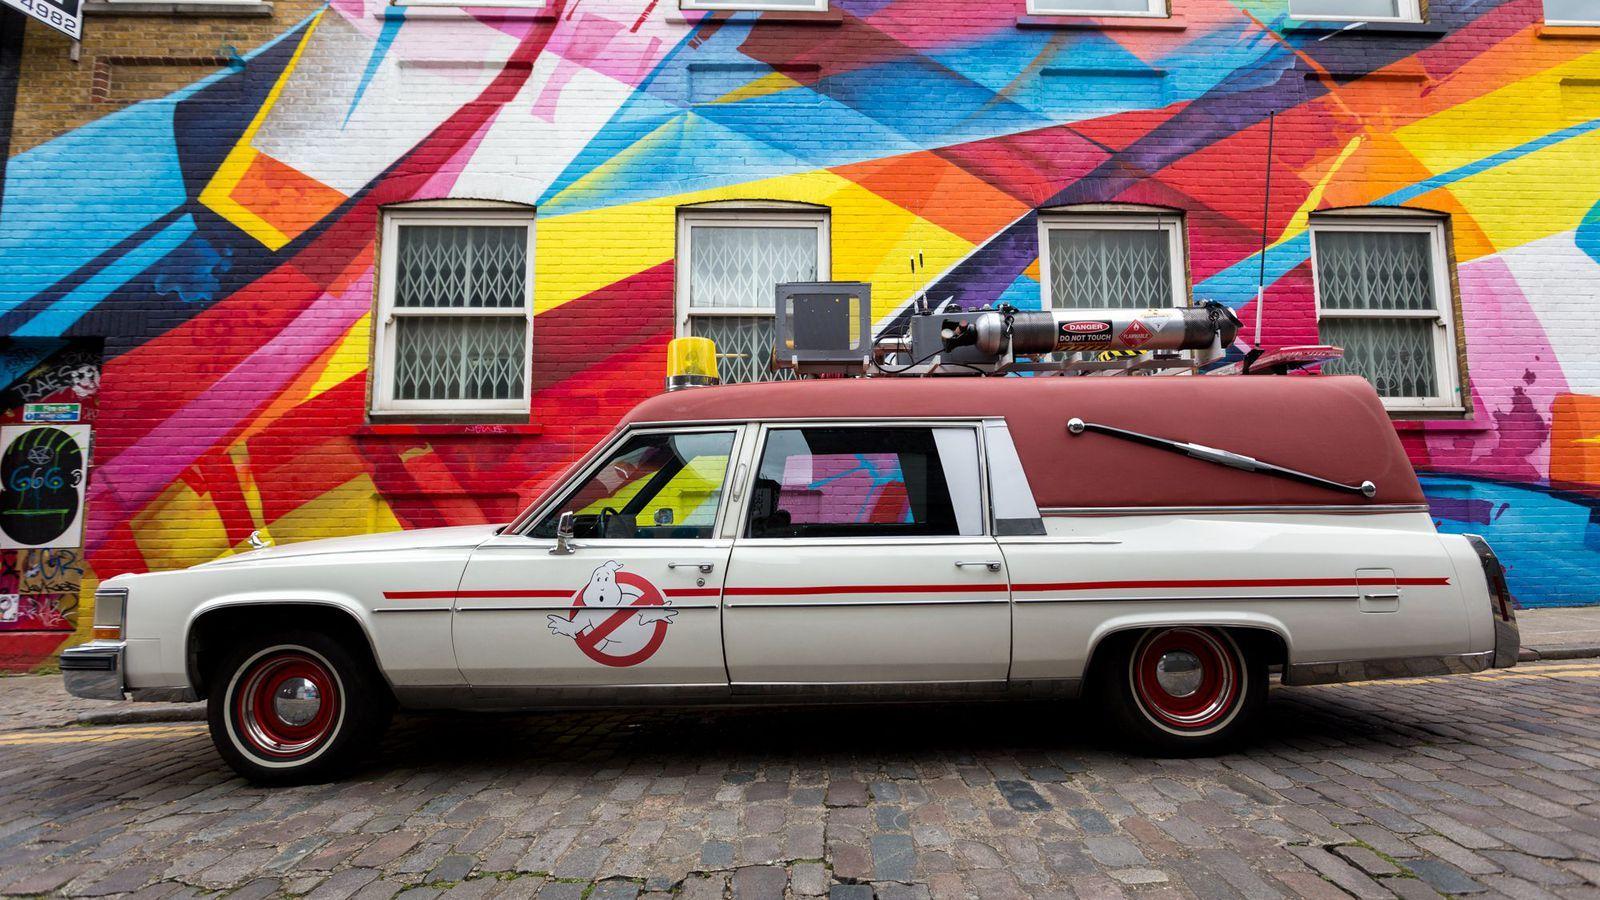 Take A Spooky Spin In The New Ecto 1 From 'Ghostbusters'